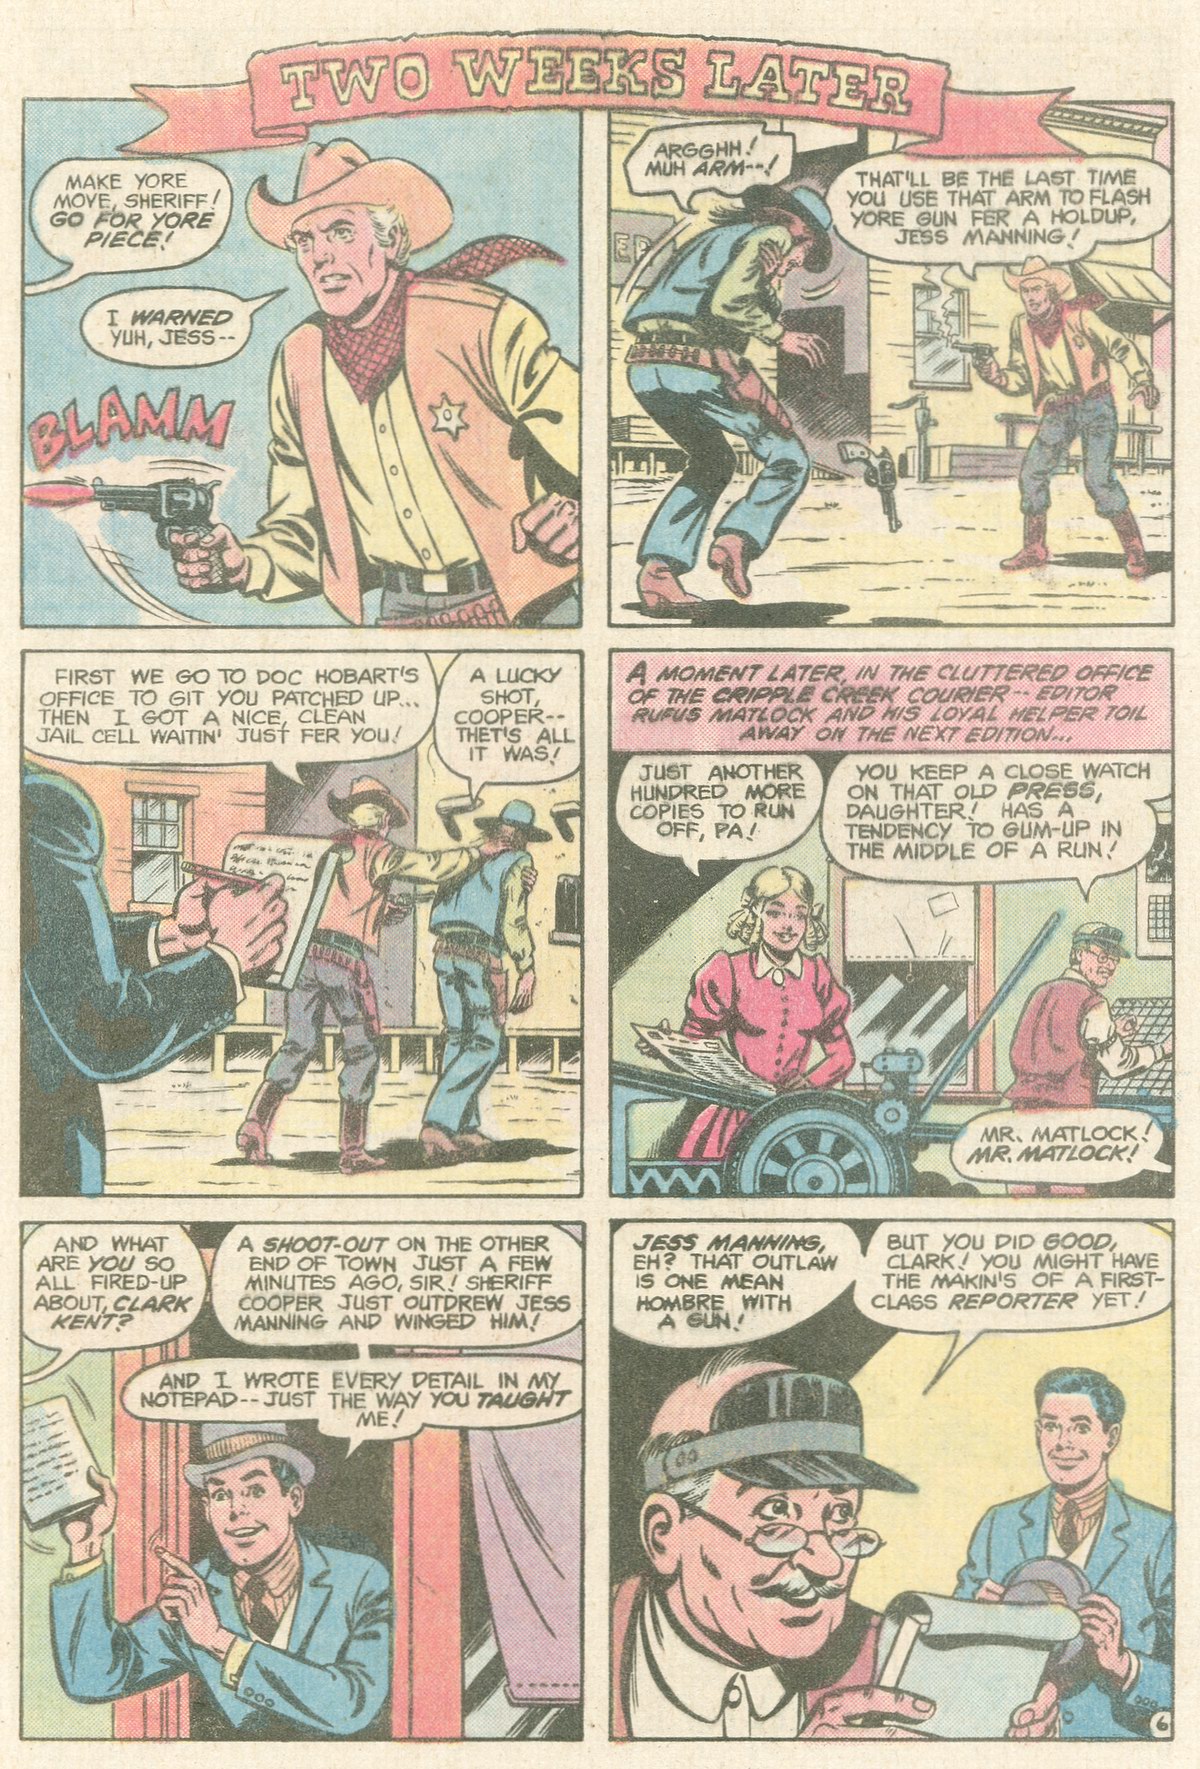 The New Adventures of Superboy 23 Page 6